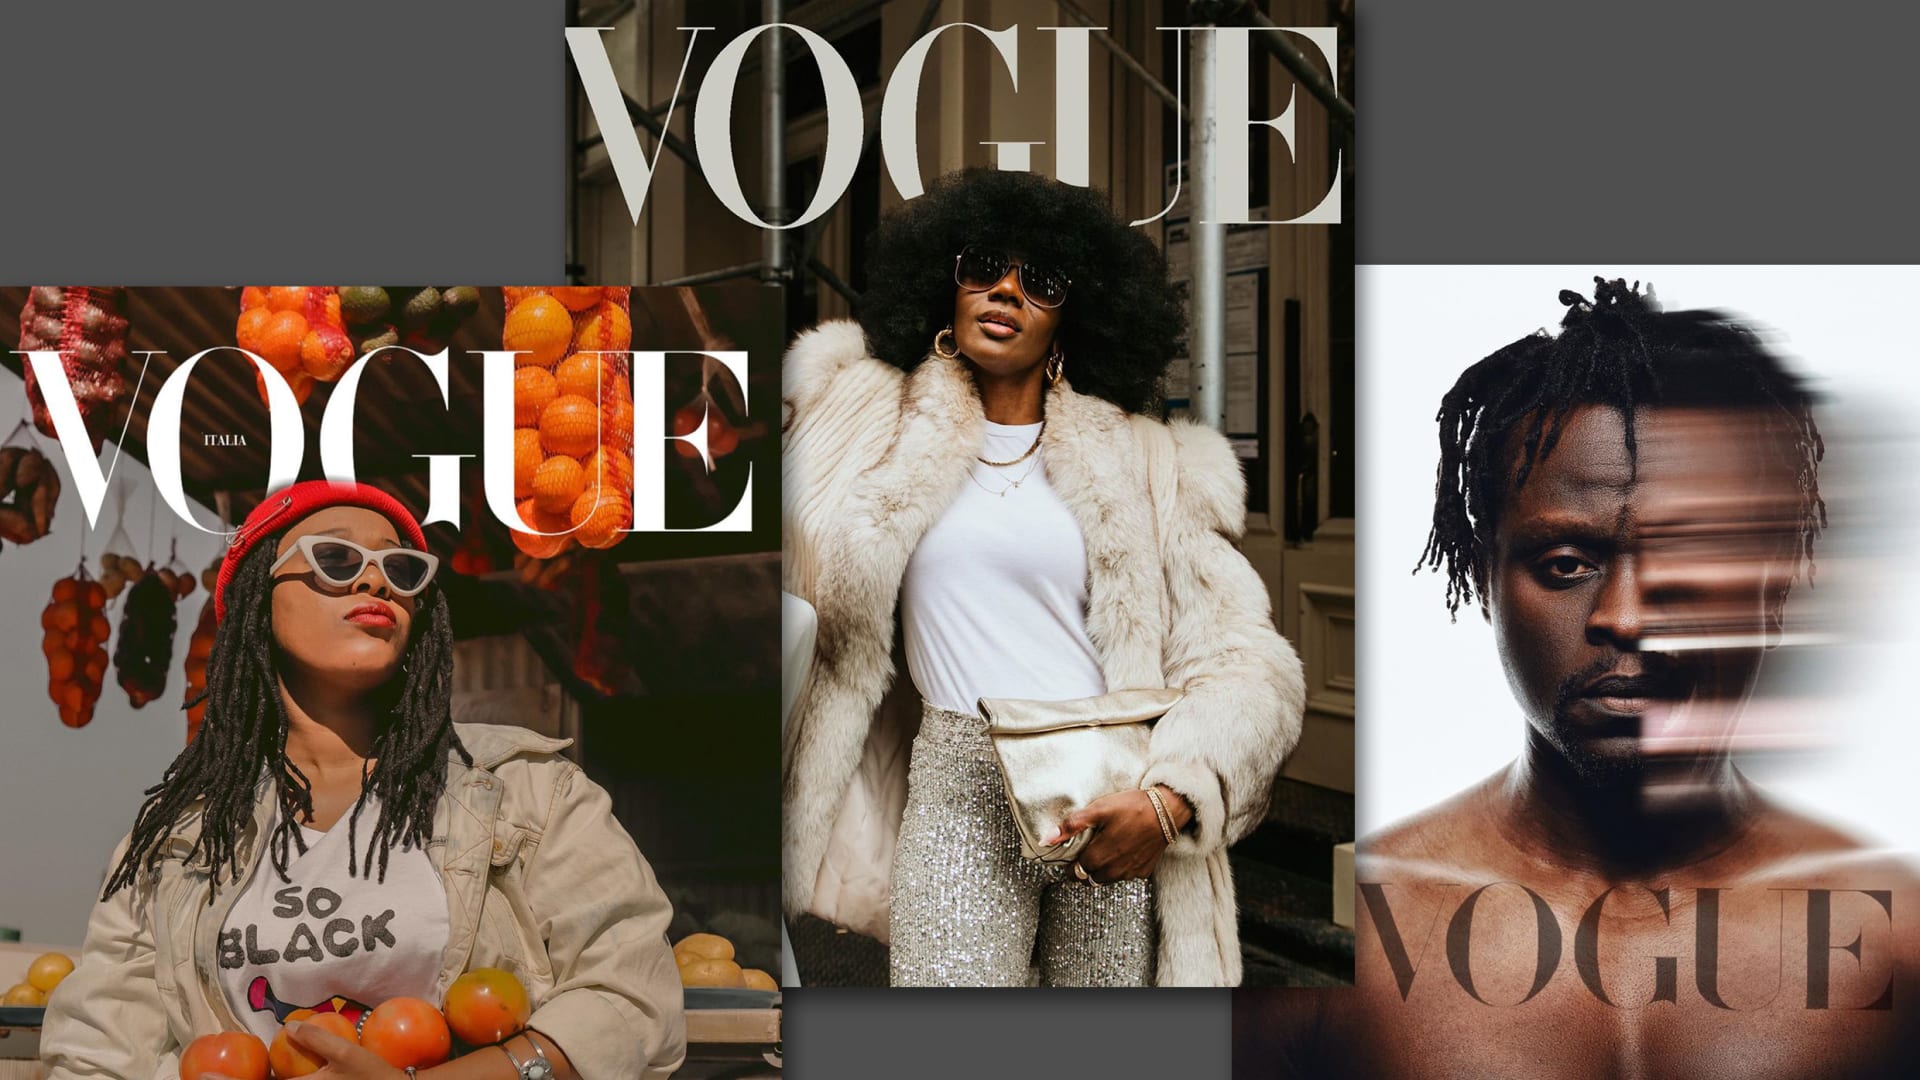 ‘Vogue’ has a history of whitewashed covers. These alternatives offer a brilliant critique